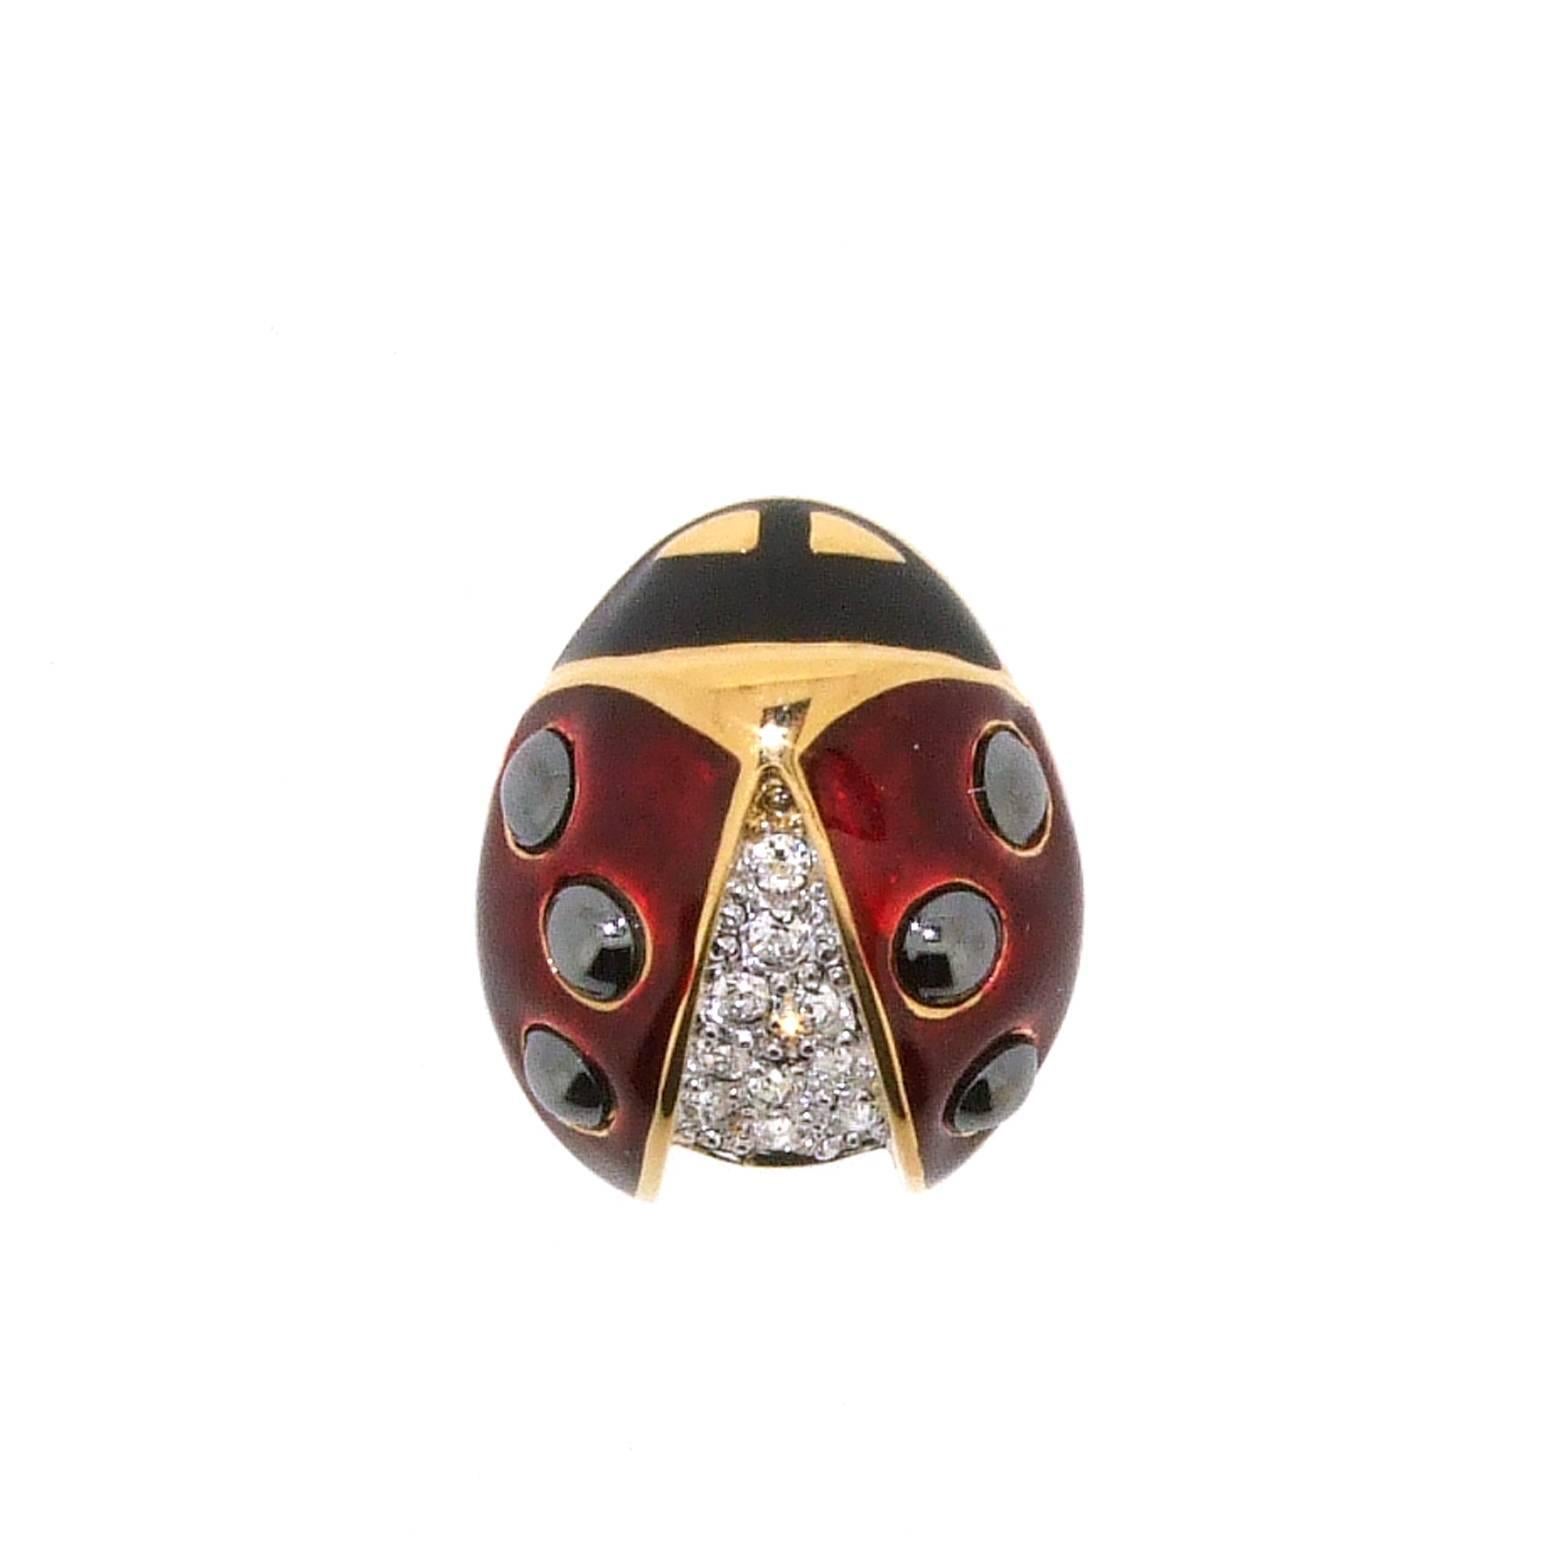 A new ladybird/ ladybug brooch by Bill Skinner UK. Set in 18k gold plate and decorated with enamel and swarovski crystal.

It measures 2.3cm high by 2cm wide, 1.2cm deep.

Our shop Hirst Antiques is in London, Portobello Road.